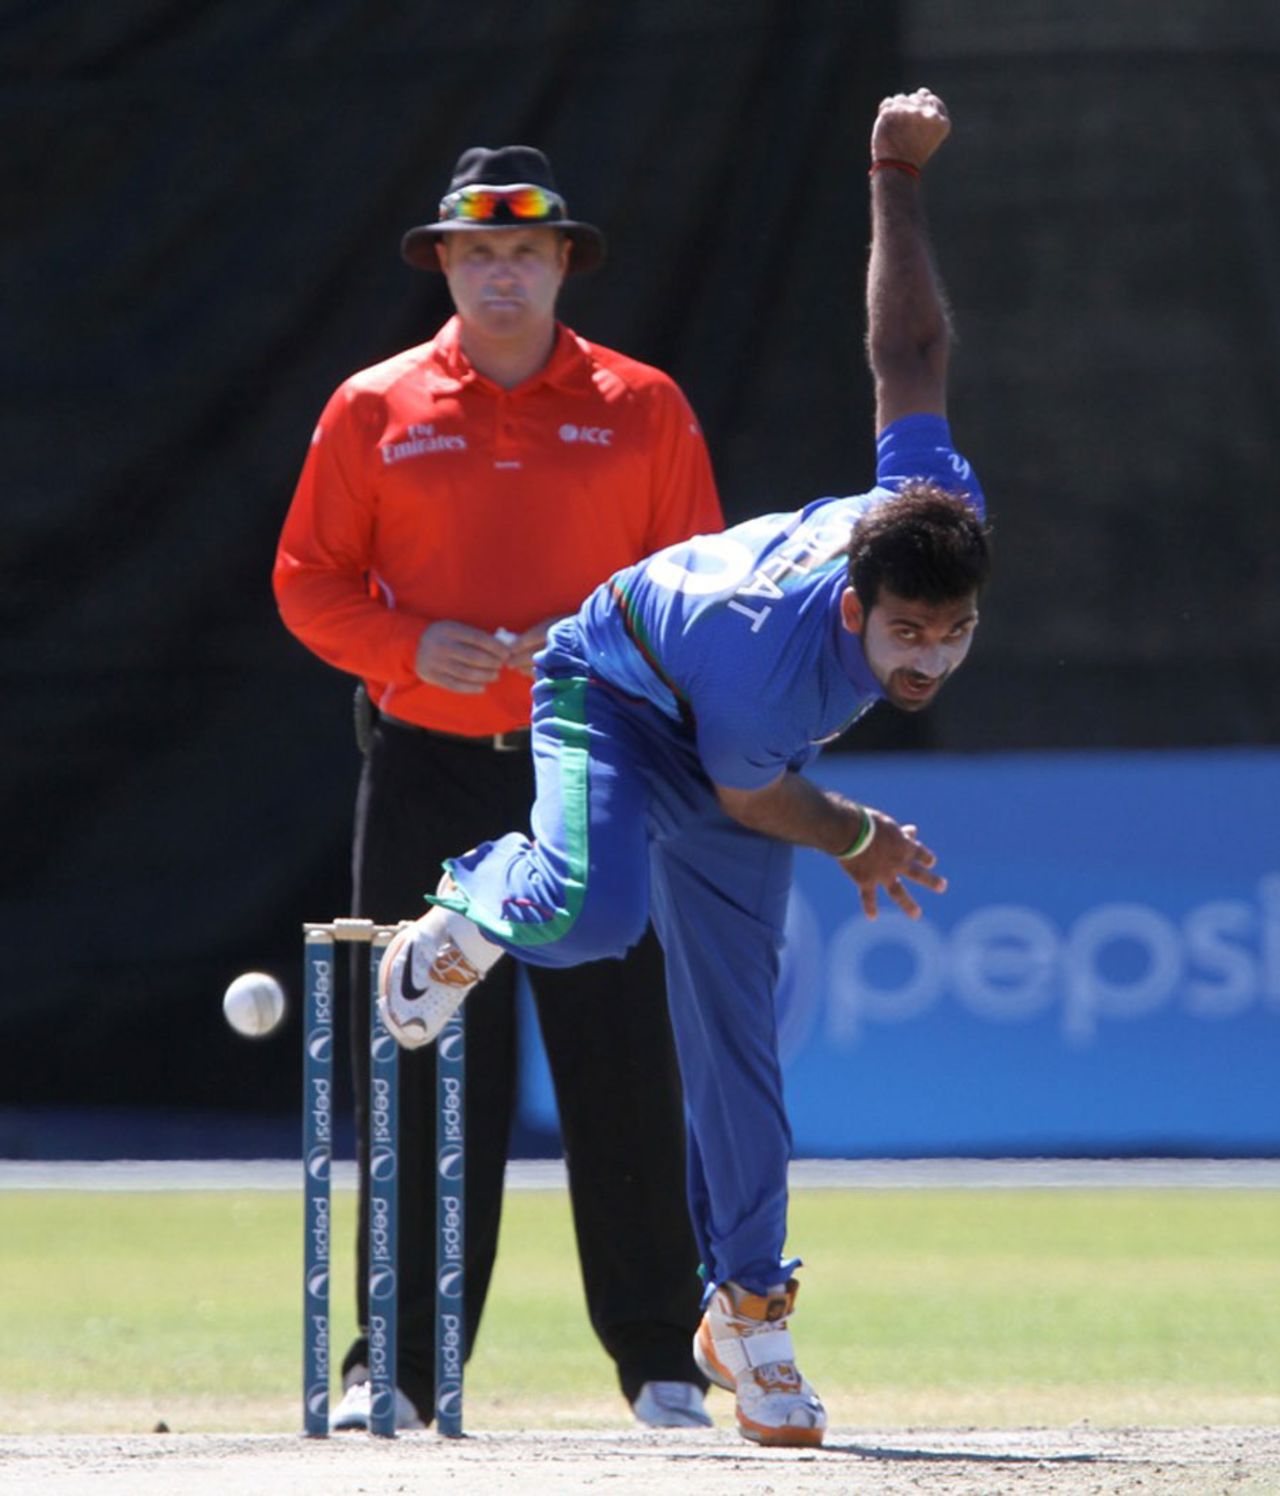 Afghanistan fast bowler Dawlat Zadran in his delivery stride, Namibia v Afghanistan, WCL Championship, Windhoek, August 9, 2013